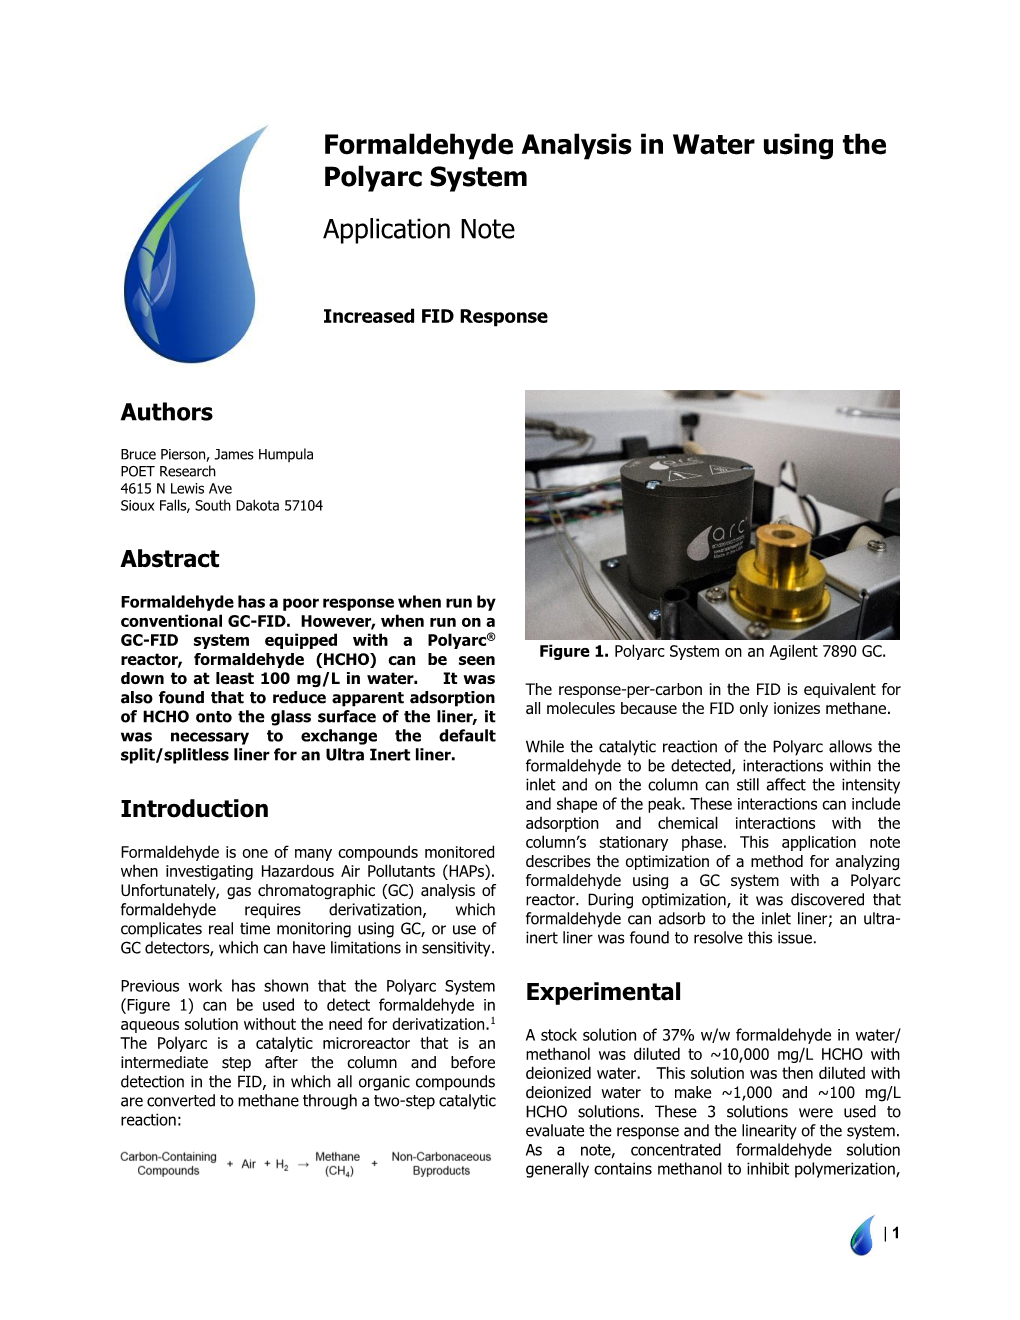 Formaldehyde Analysis in Water Using the Polyarc System